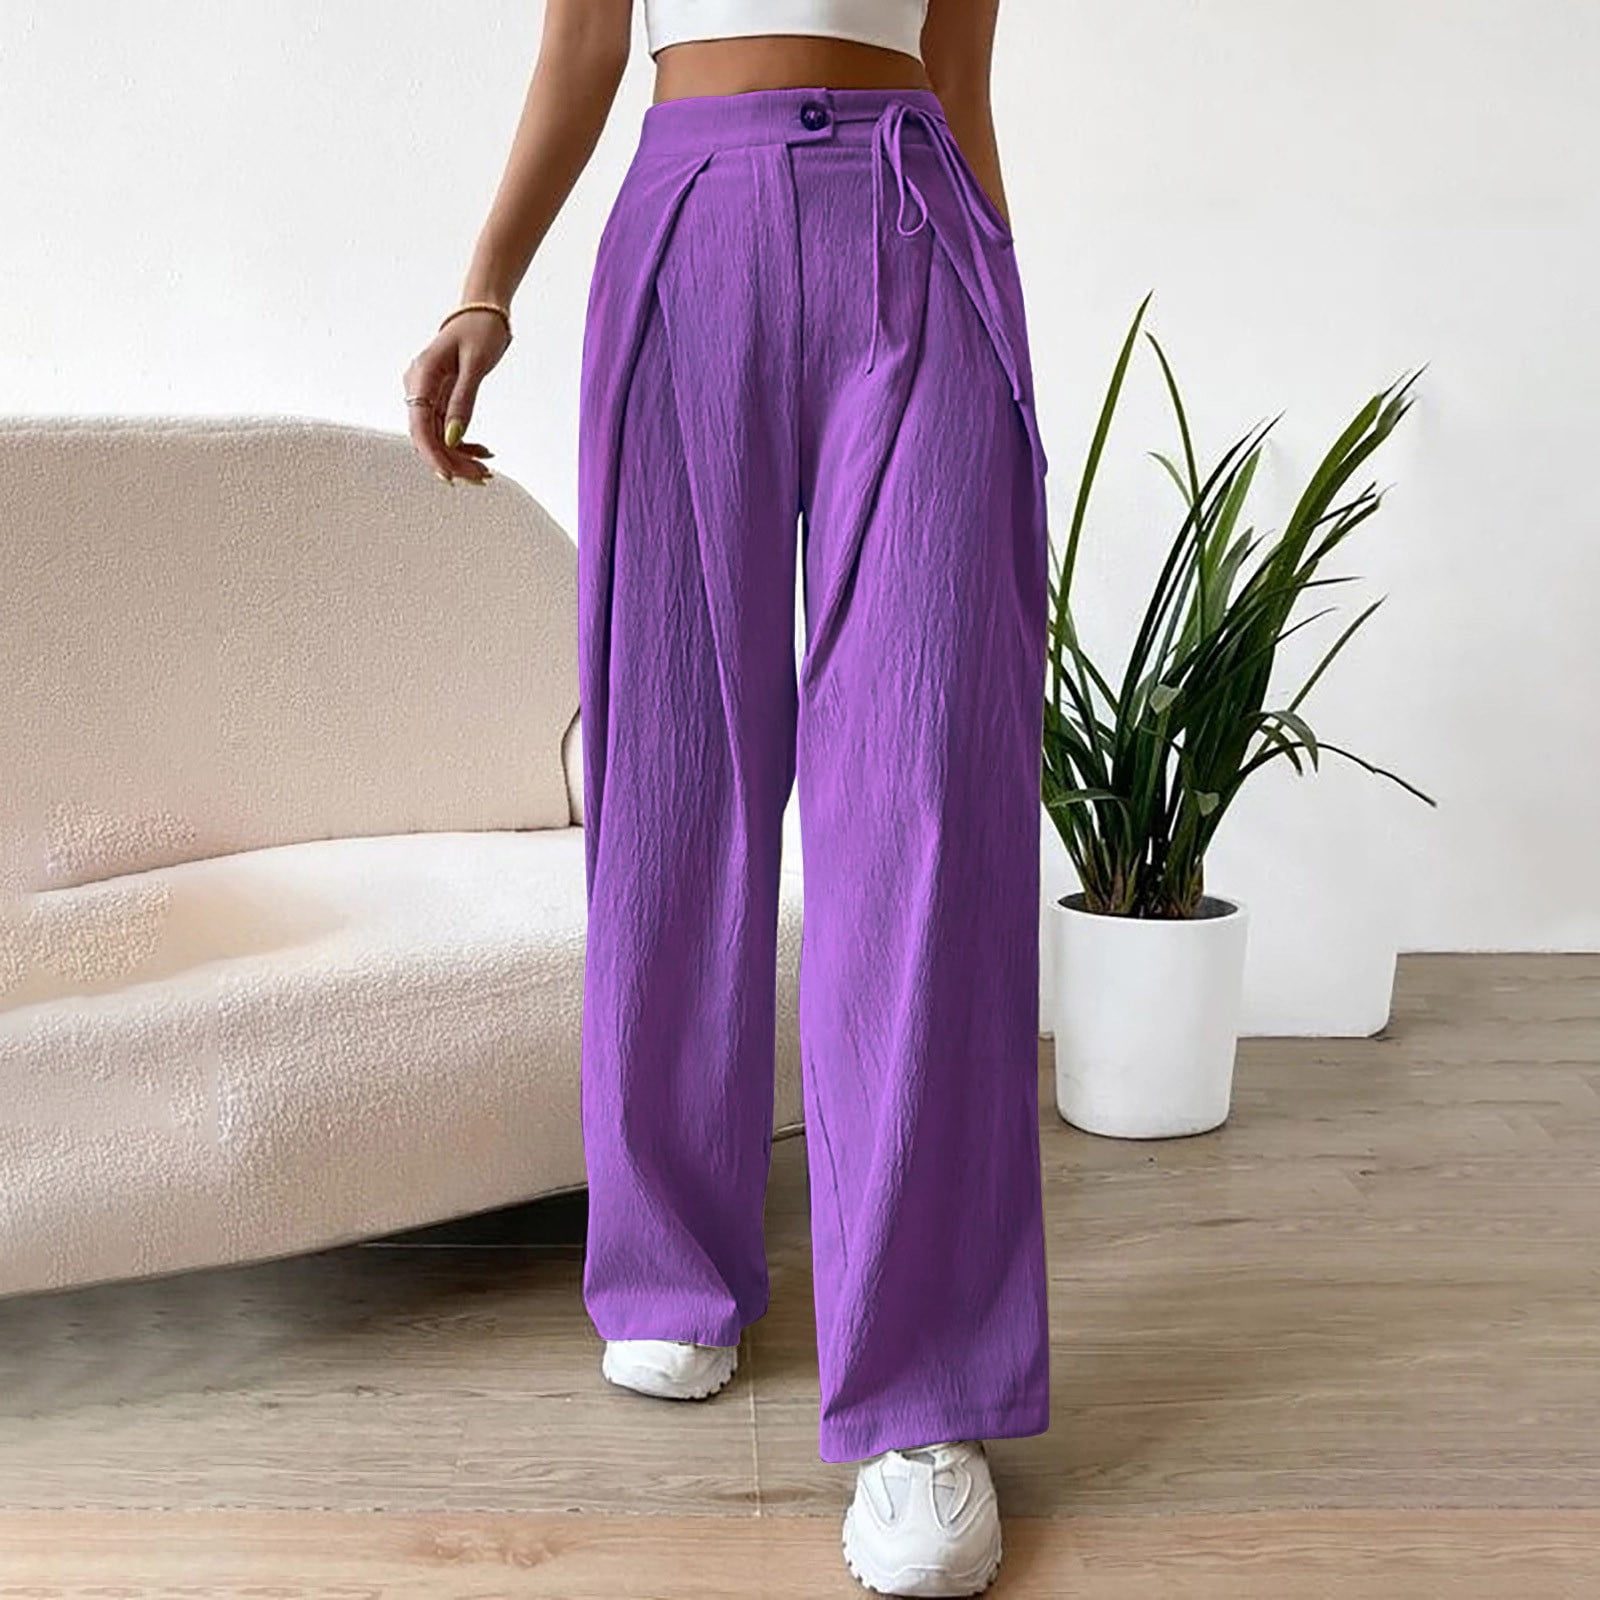 Satin Tube Top & Wide Leg Pants | Silk pants outfit, Two piece outfits  pants, Purple top outfit